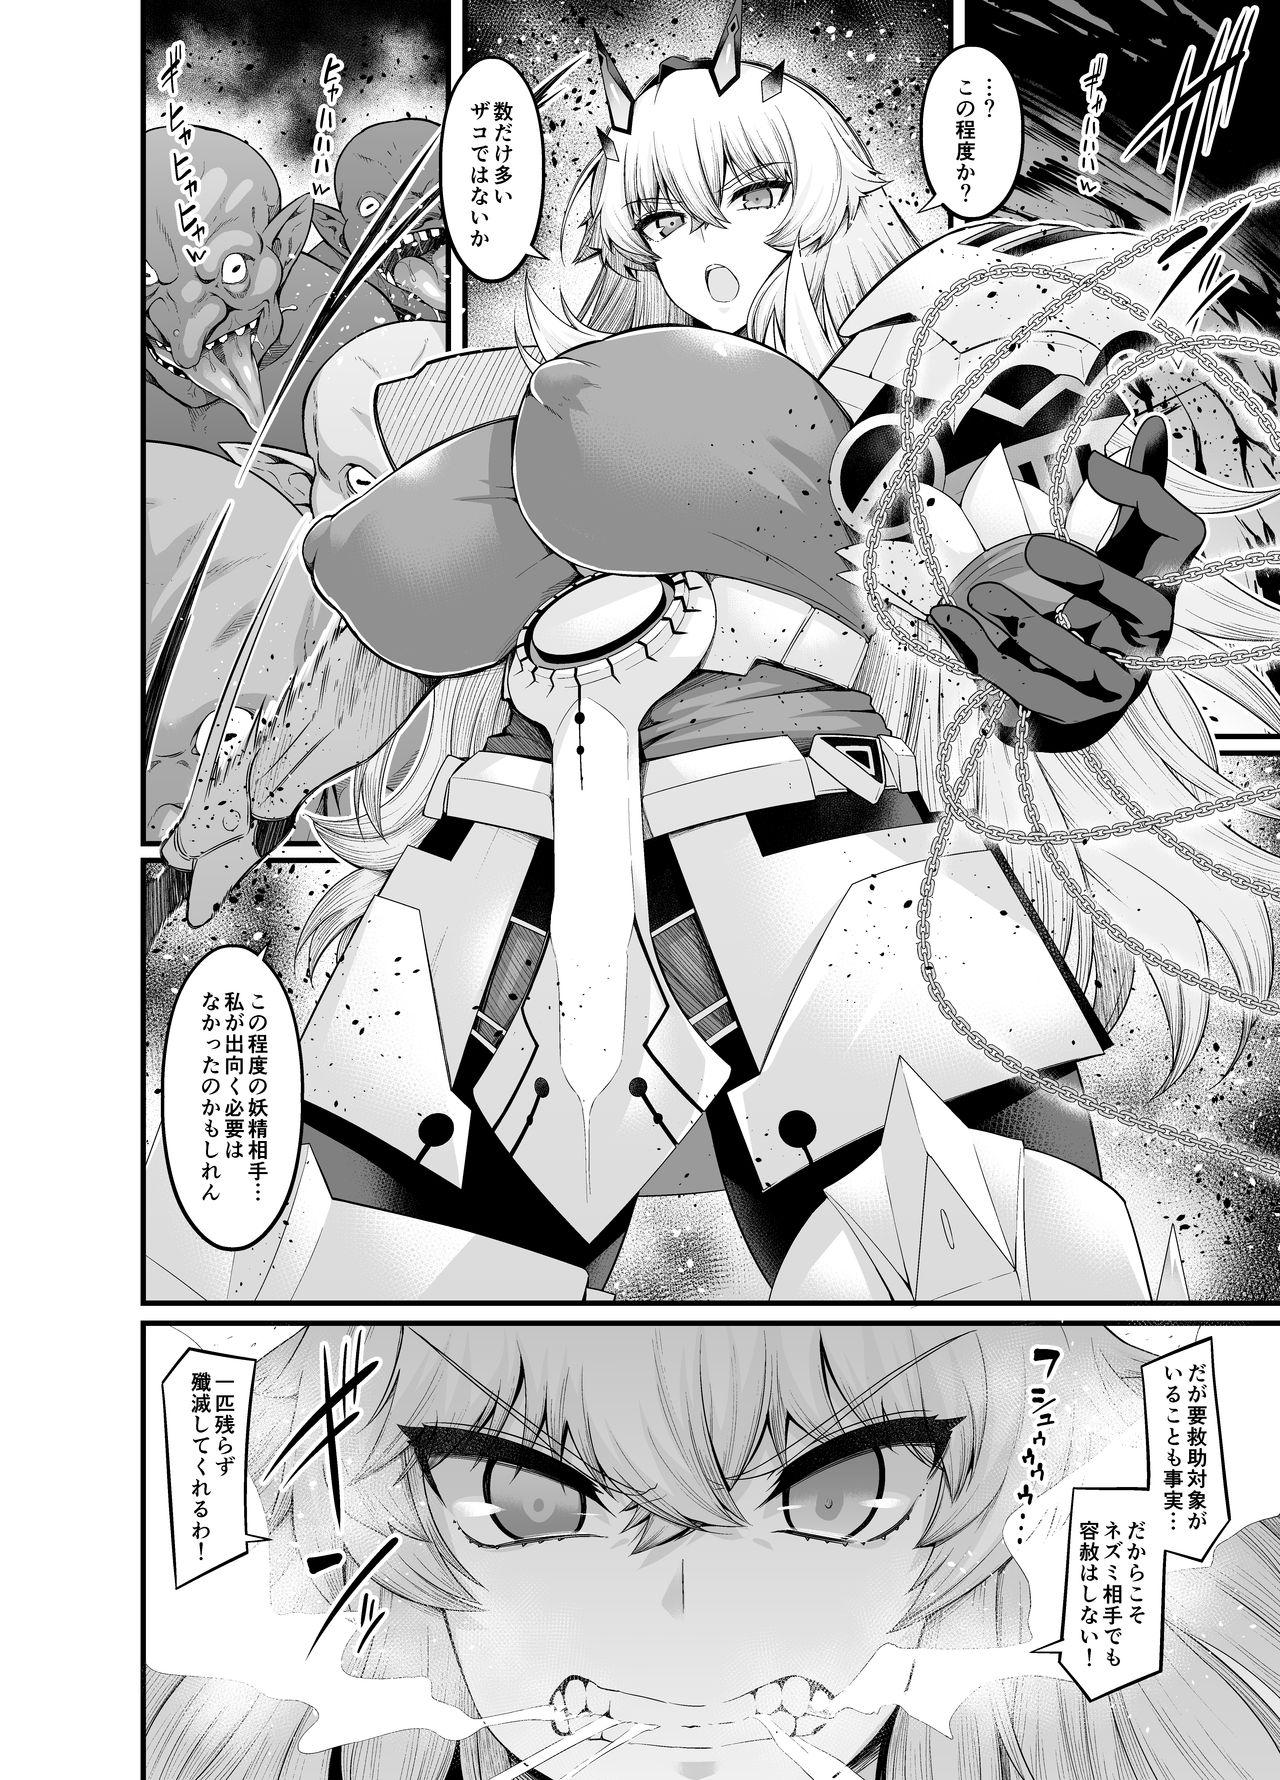 Sweet Barghest vs Goblin - Fate grand order Chunky - Page 1